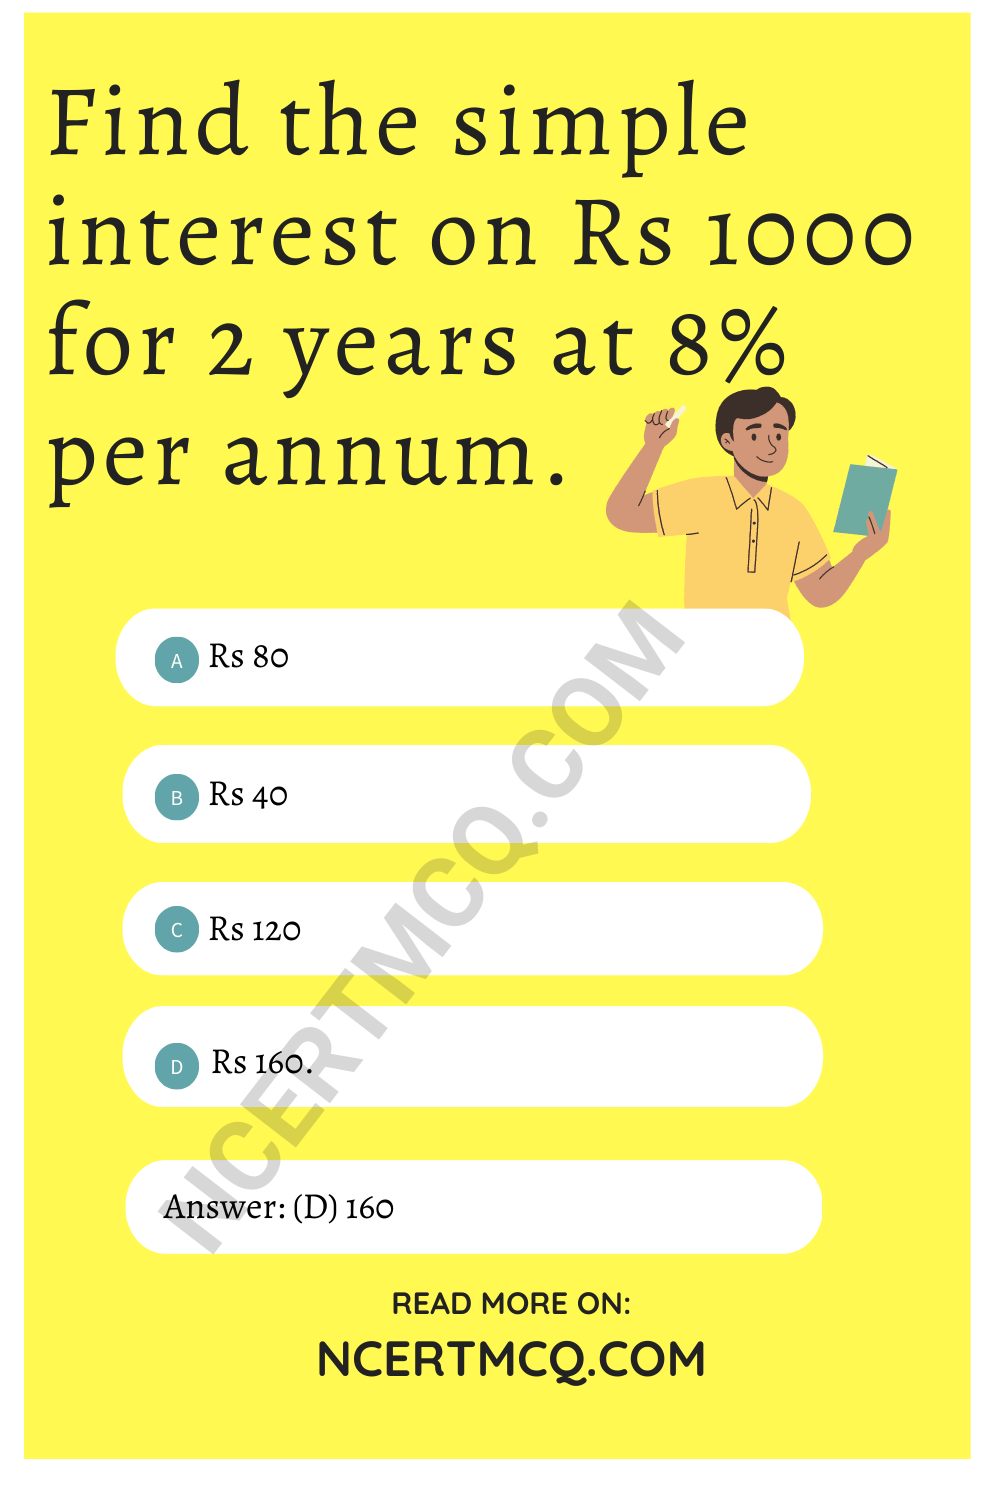 Find the simple interest on Rs 1000 for 2 years at 8% per annum.